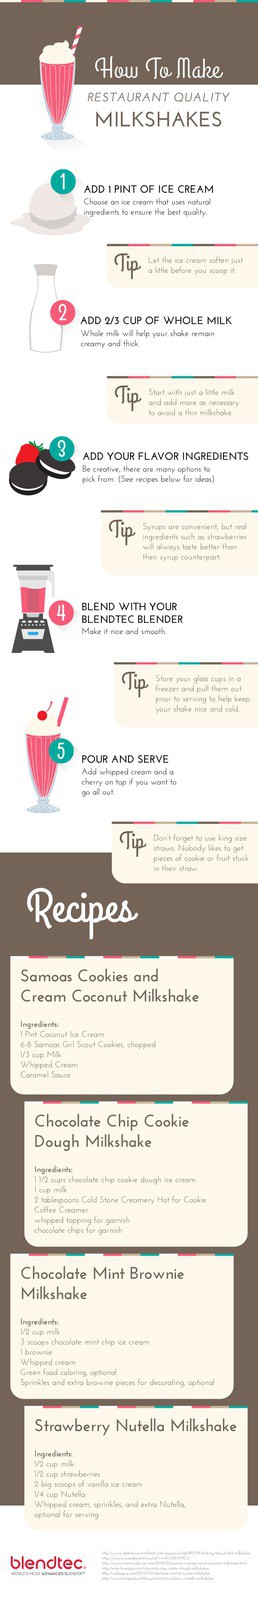 How To Make Restaurant Quality Milkshakes + 4 Recipes - Make your own thick and creamy milkshakes. Grab your favorite add-ins and blend away!